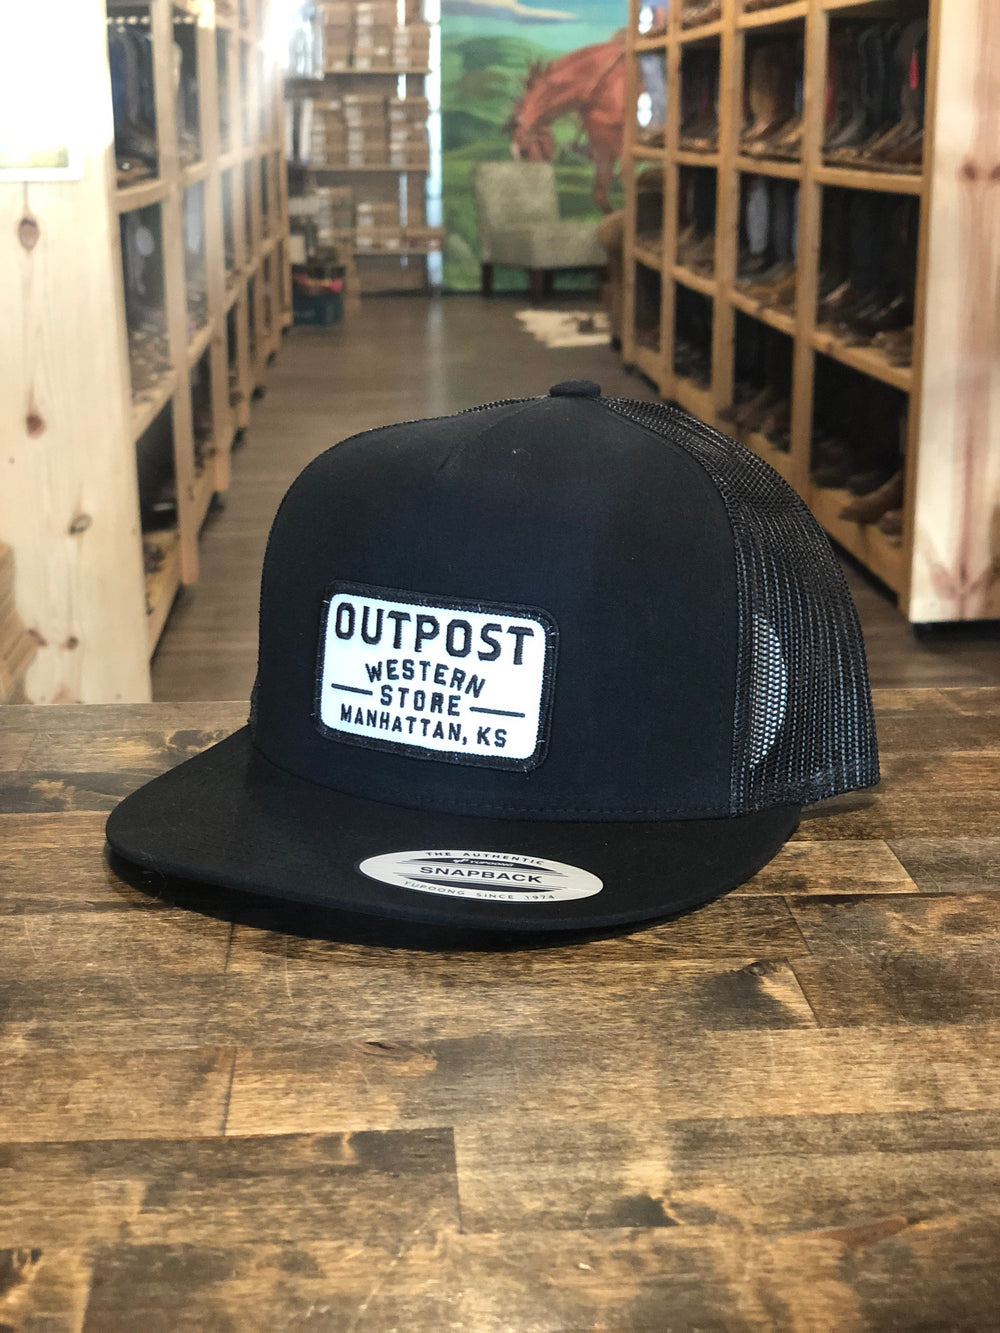 Black fabric with black mesh back, Outpost logo patch, Yupoong Trucker Cap